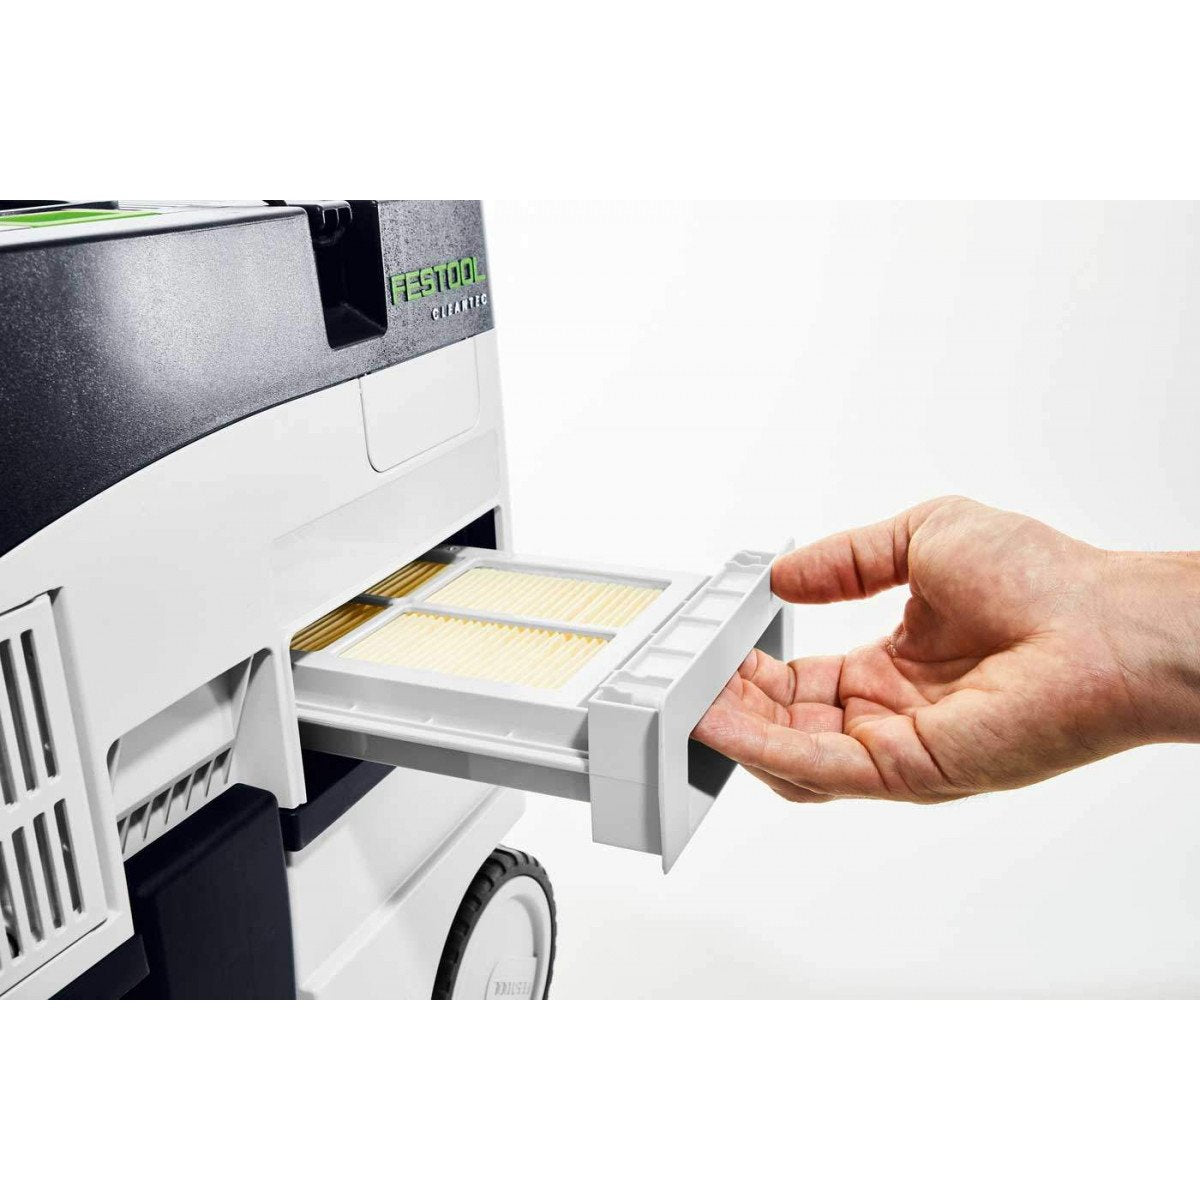 The HEPA filter is accessible from the outside via a drawer for easy inspection or replacement.